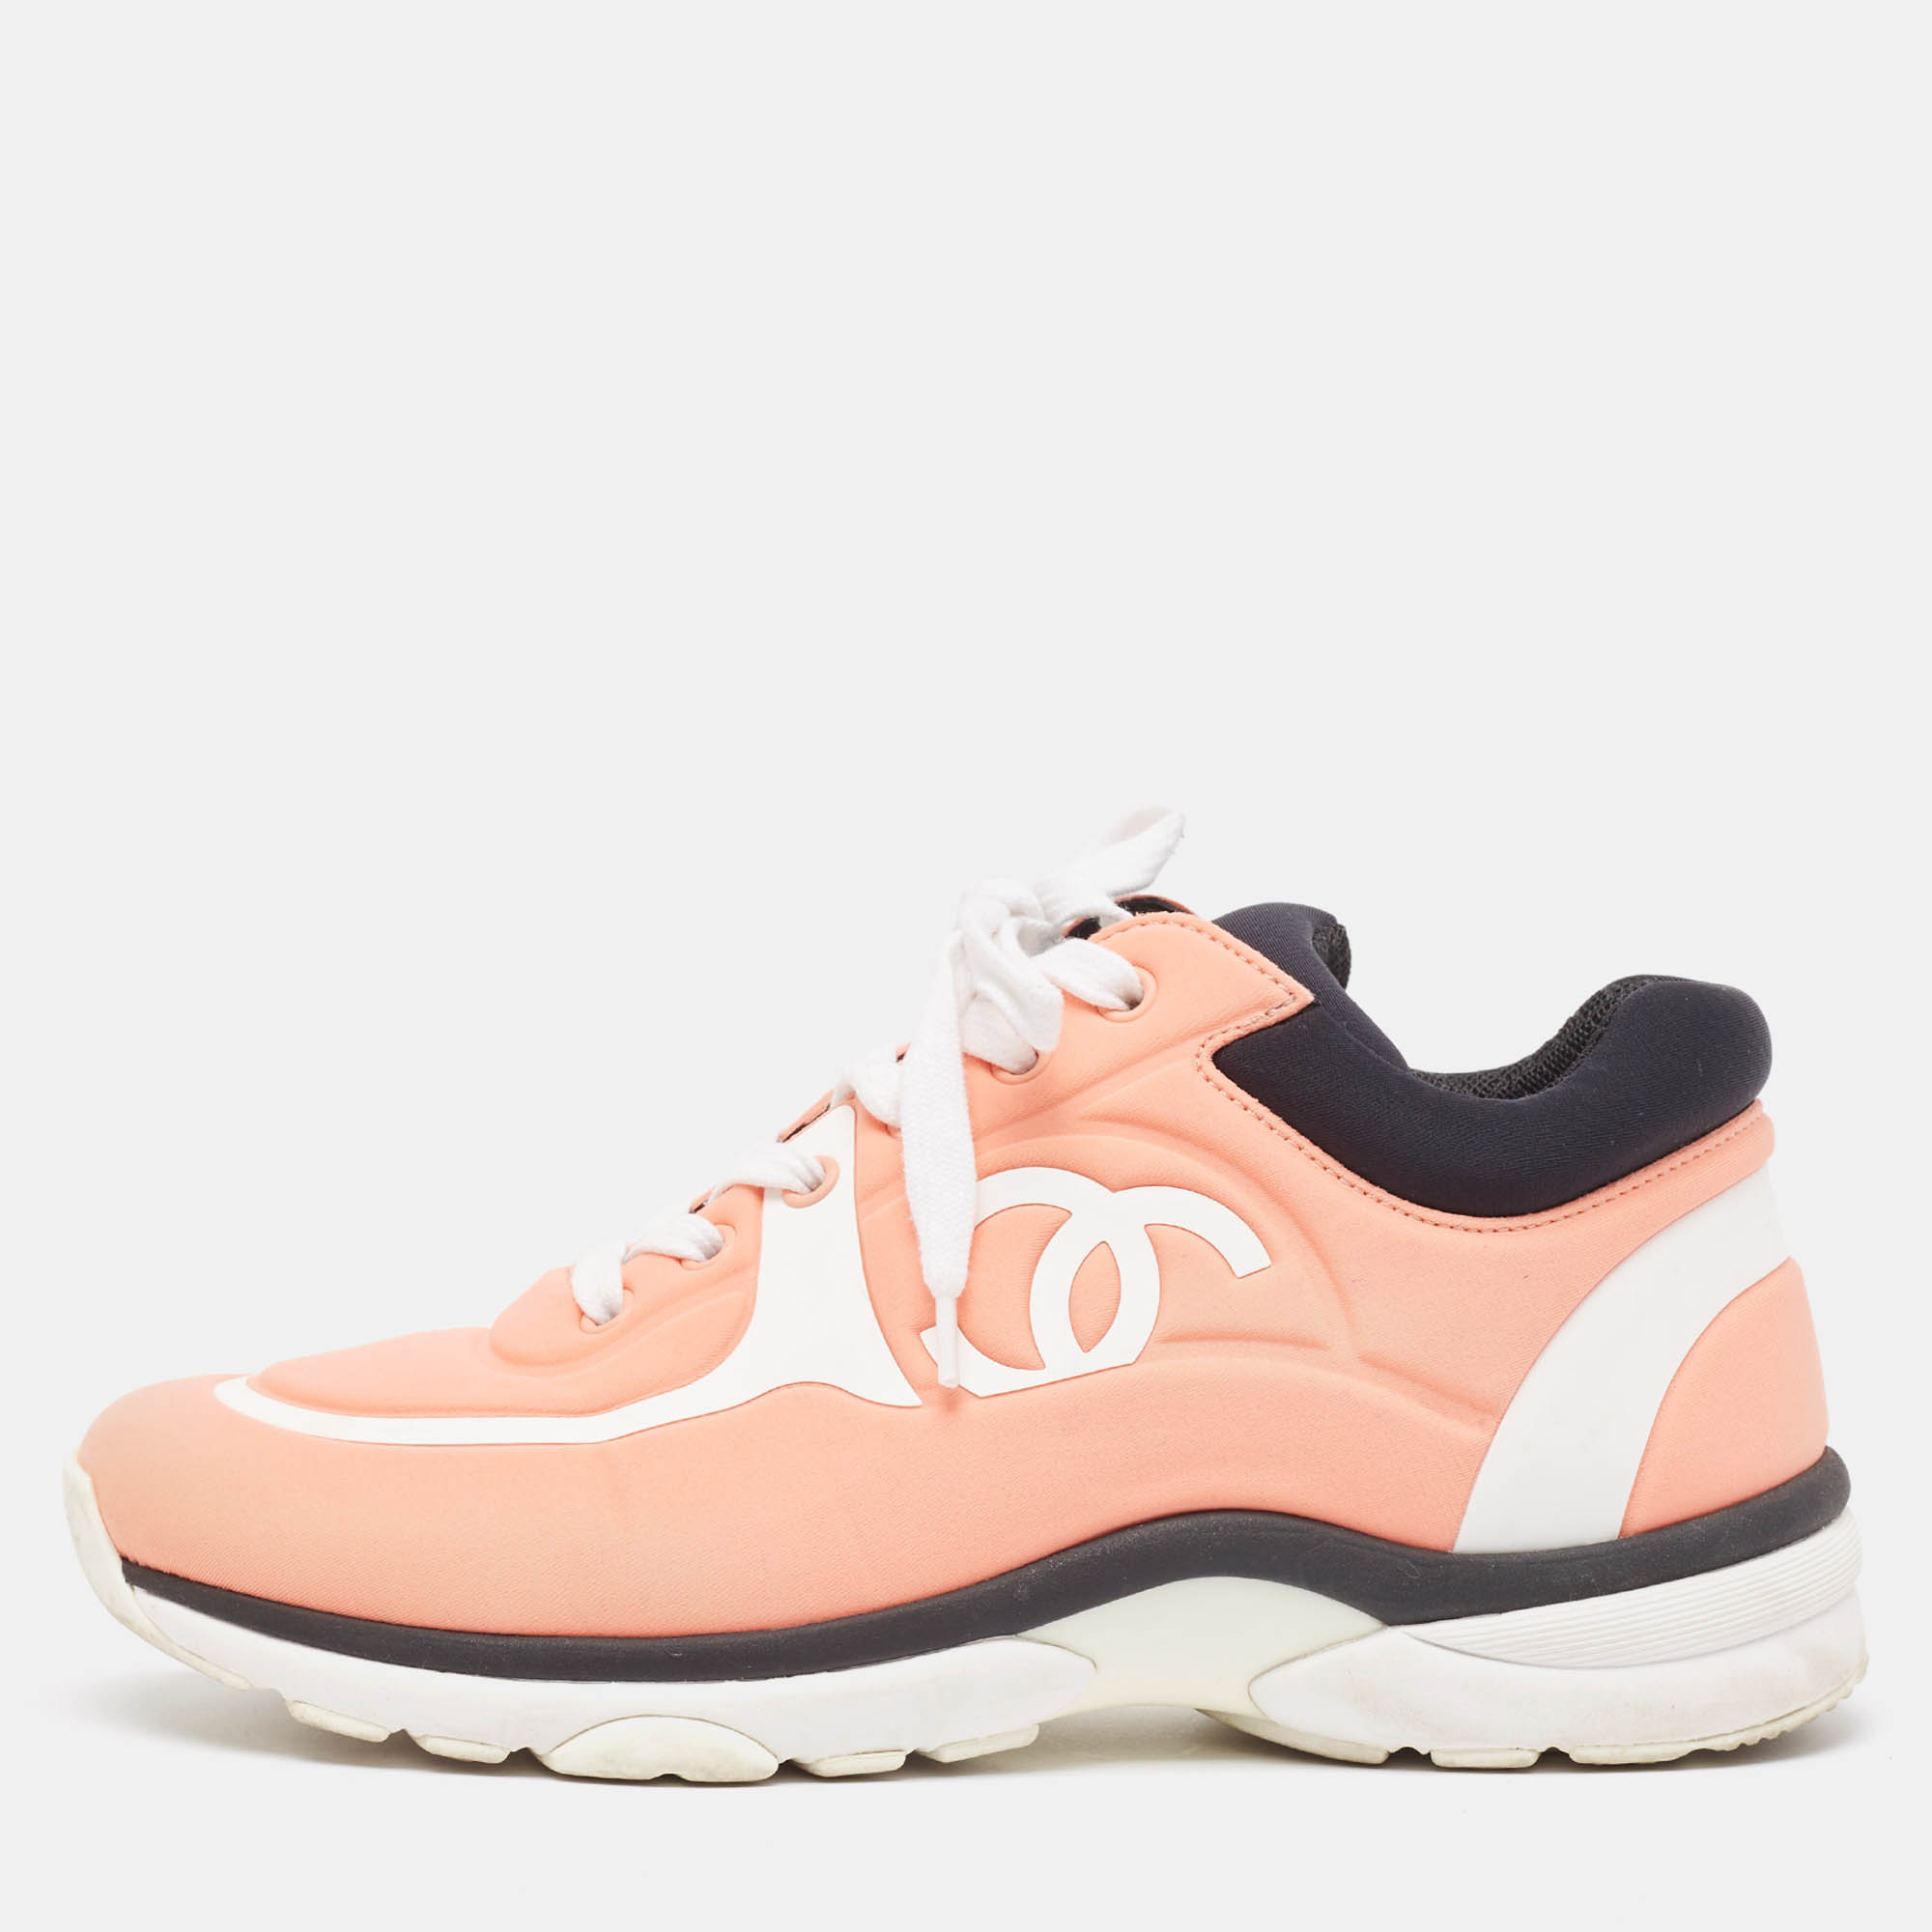 Chanel coral pink/white neoprene cc low top sneakers size 37.5